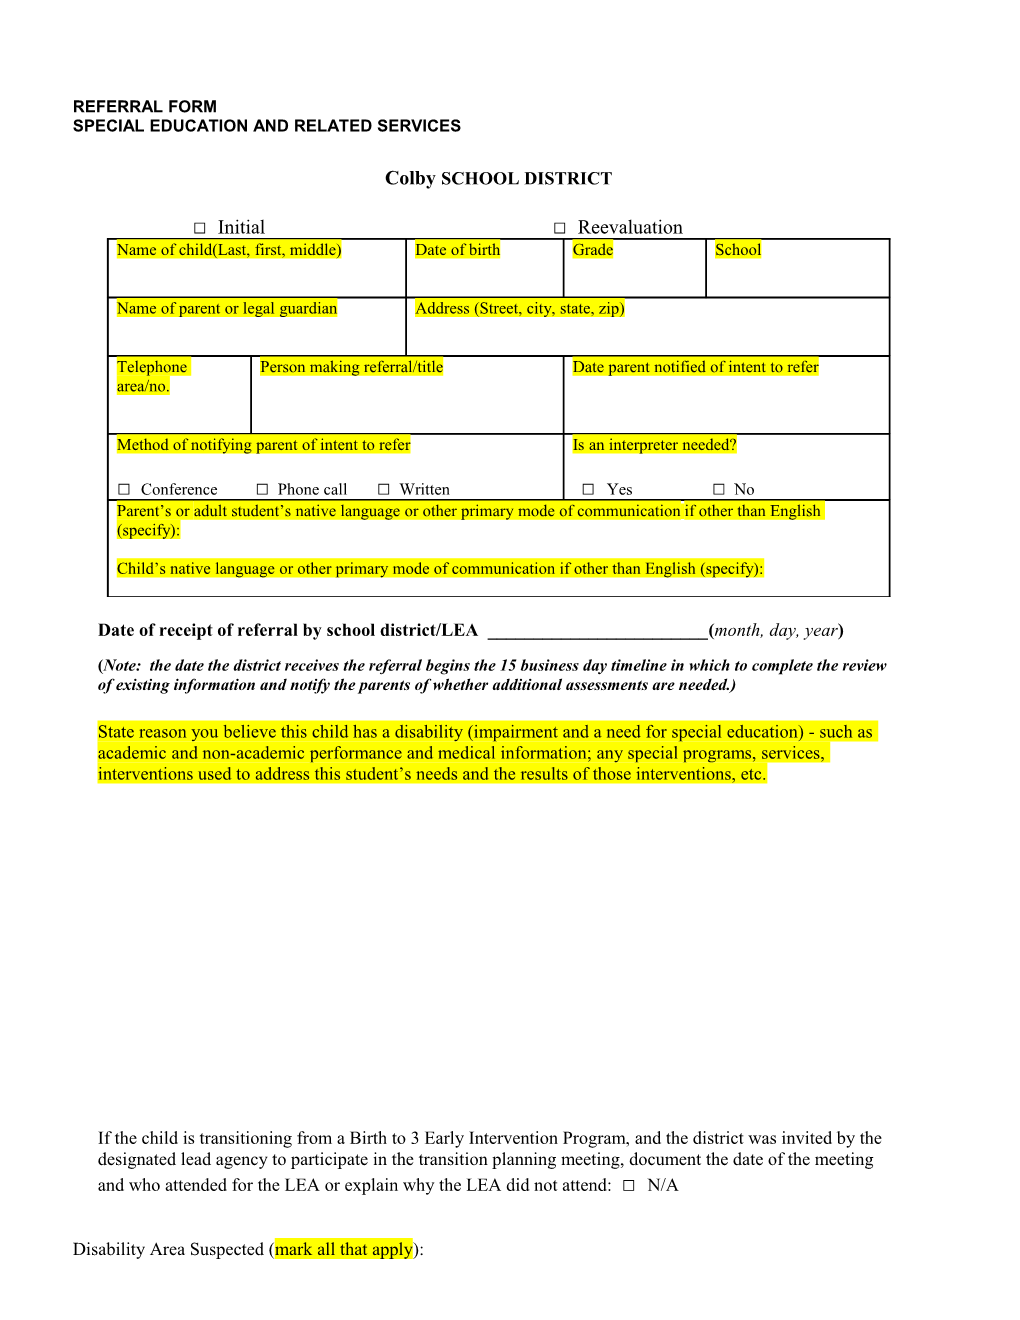 Sample Special Education Form: R1